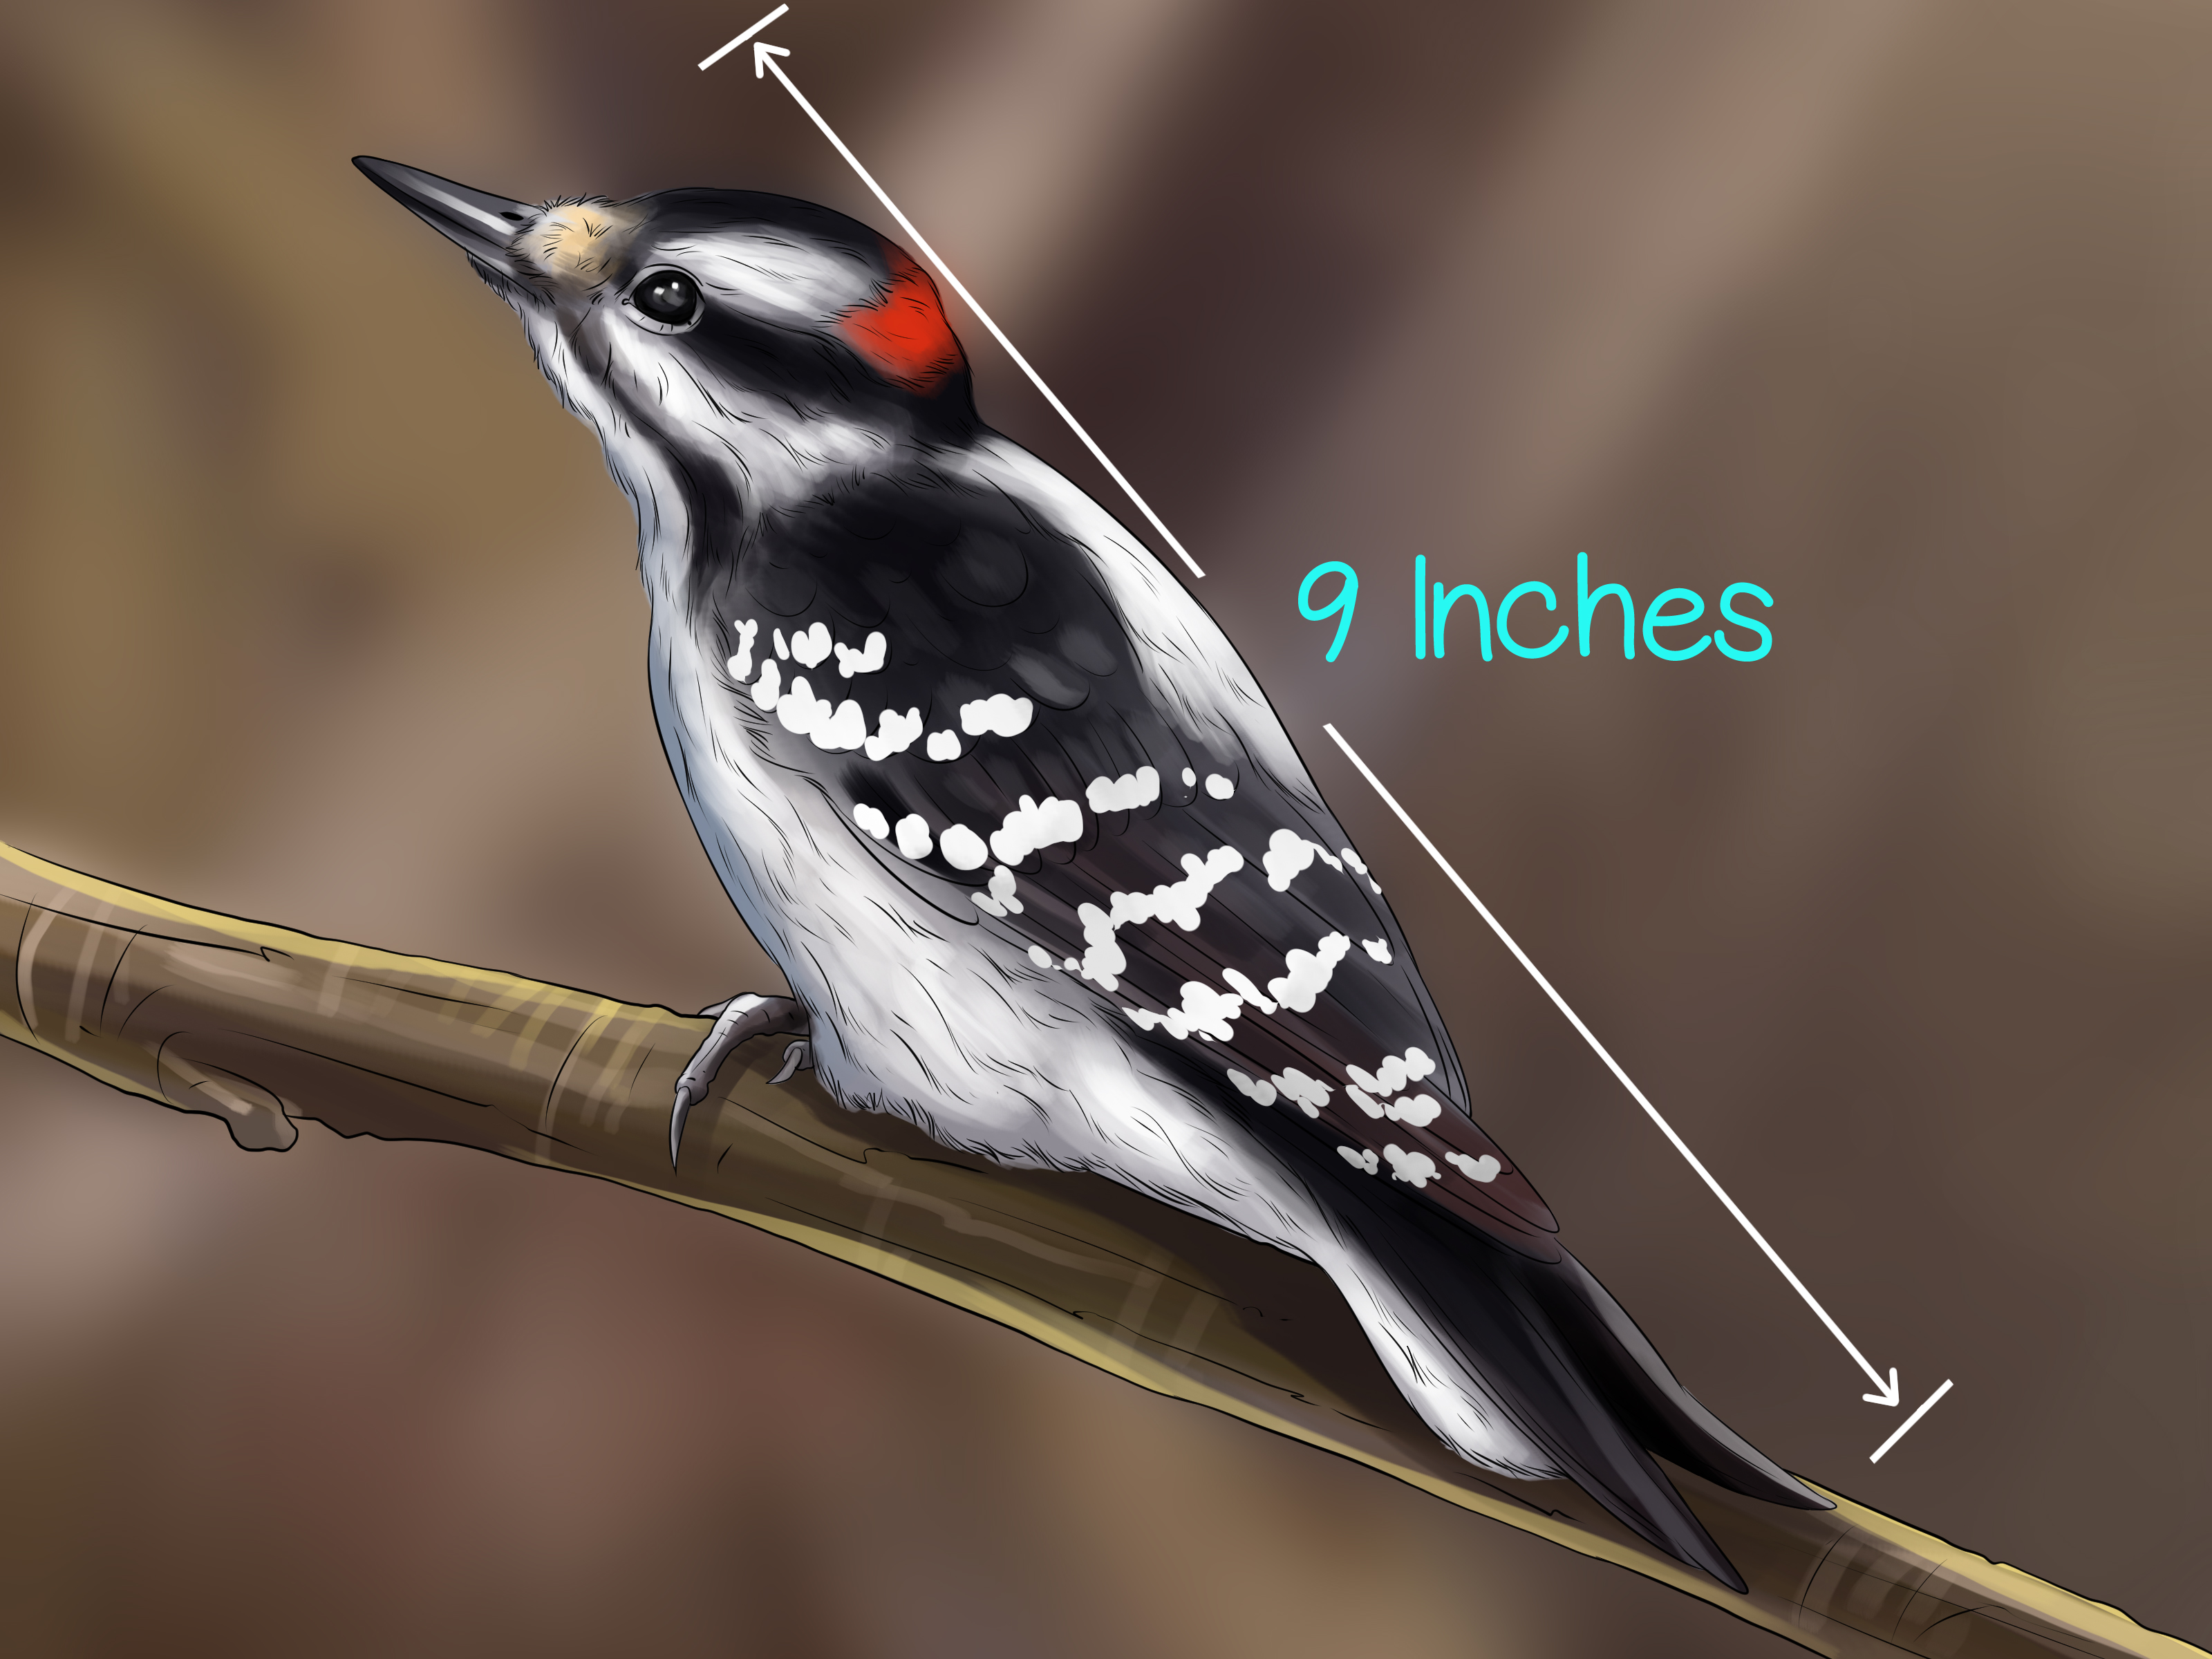 3 Ways to Attract Downy Woodpeckers - wikiHow